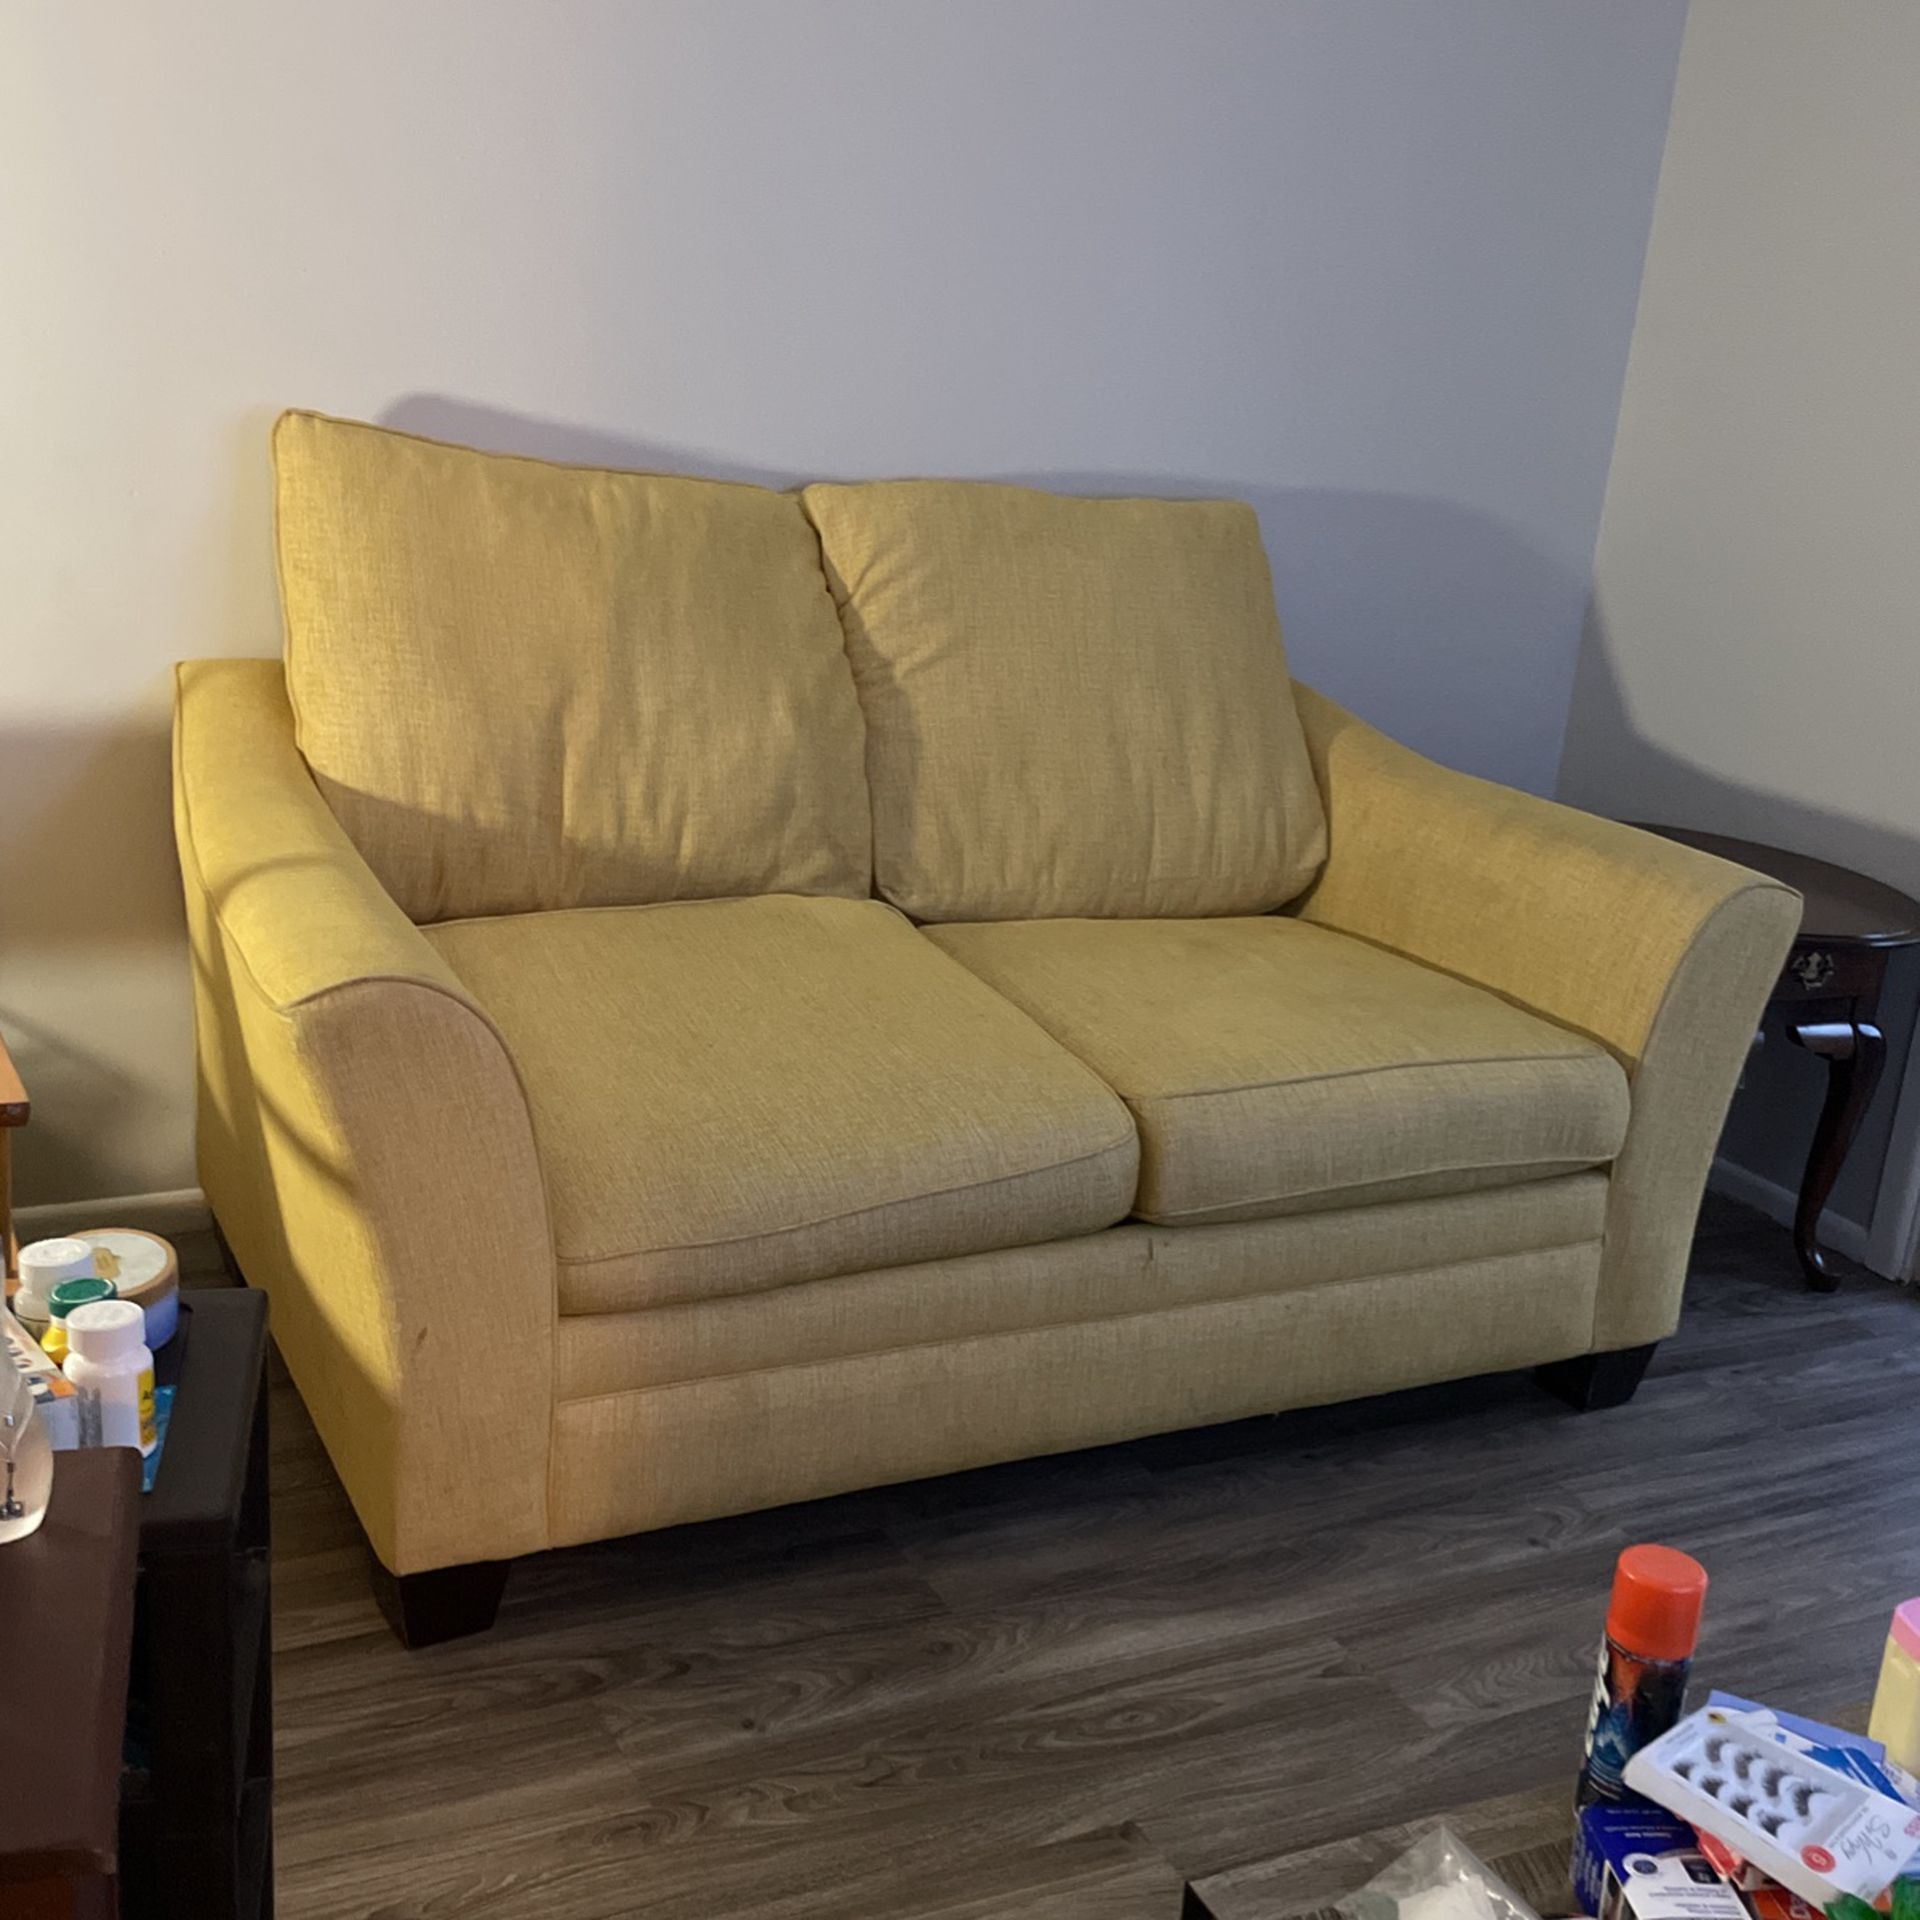 Mustard Yellow Couch